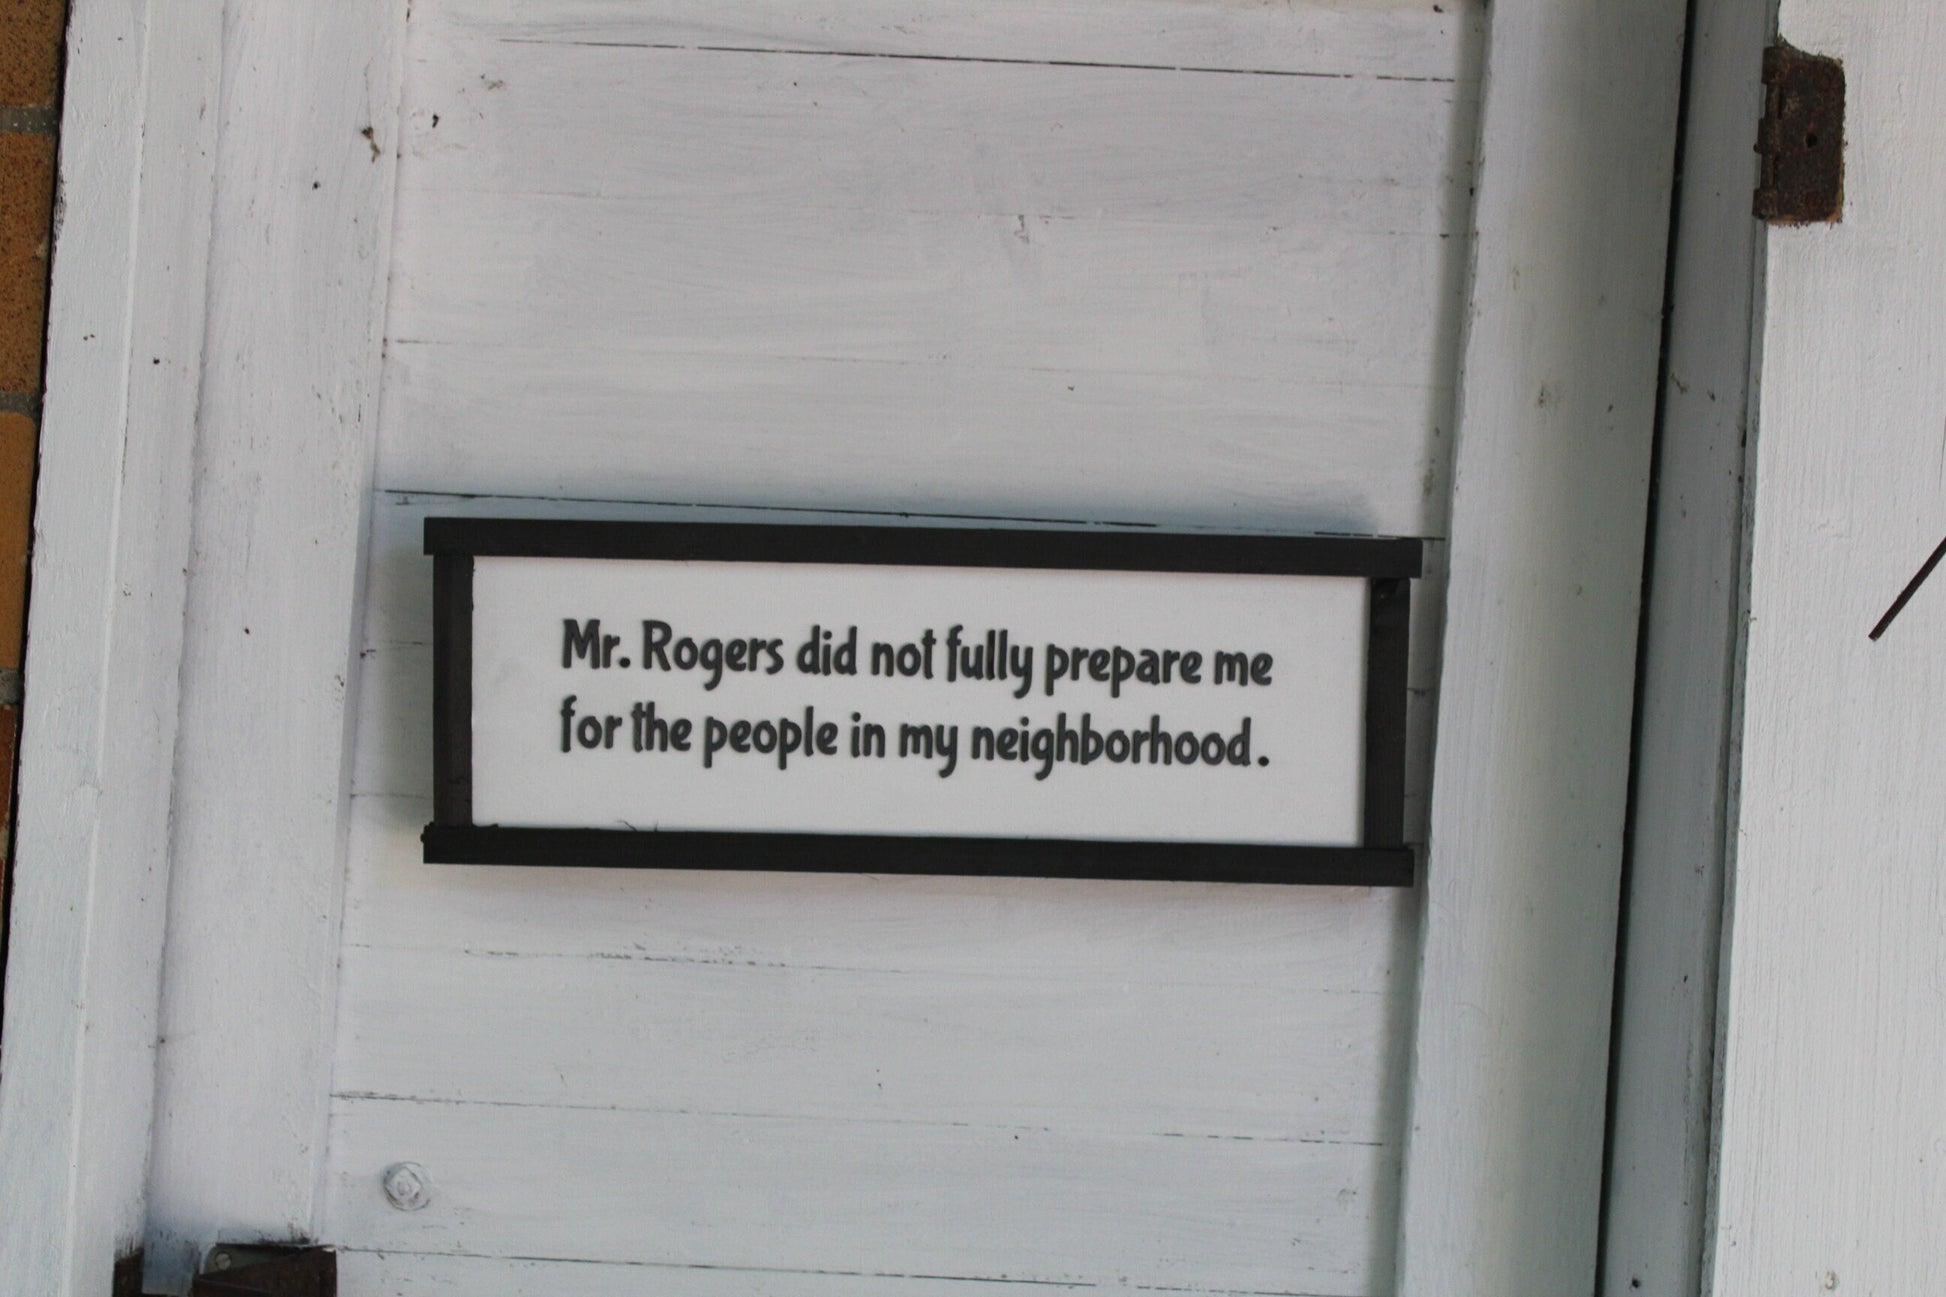 Mr. Rogers Didn't Prepare Me Wood Sign Joke Gag Gift Rustic Snarky New Home Gift Sarcastic Present Accessory Decoration Wall Decor Hanging